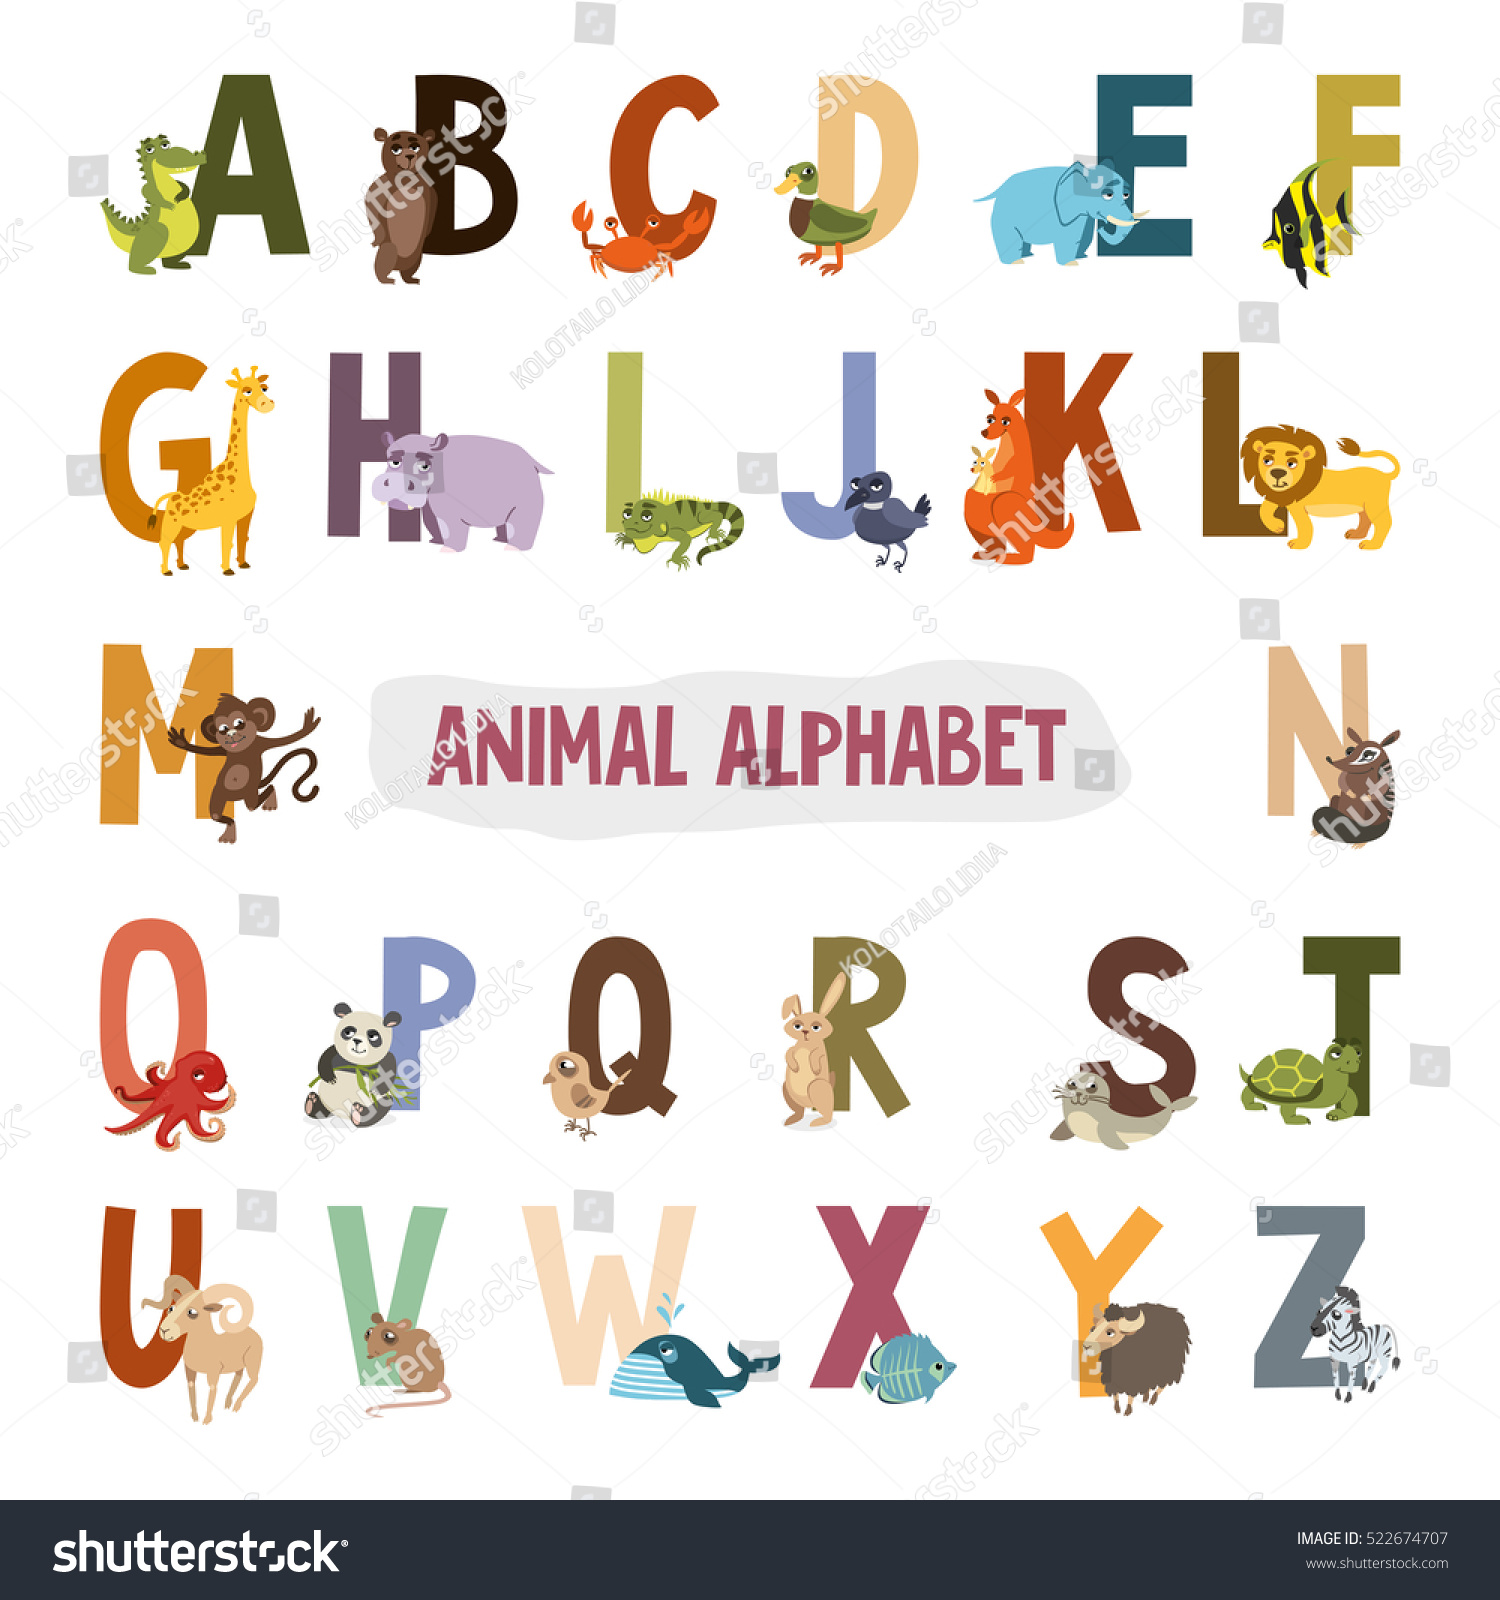 English Alphabet Animals Vector Illustration Pictures Stock Vector